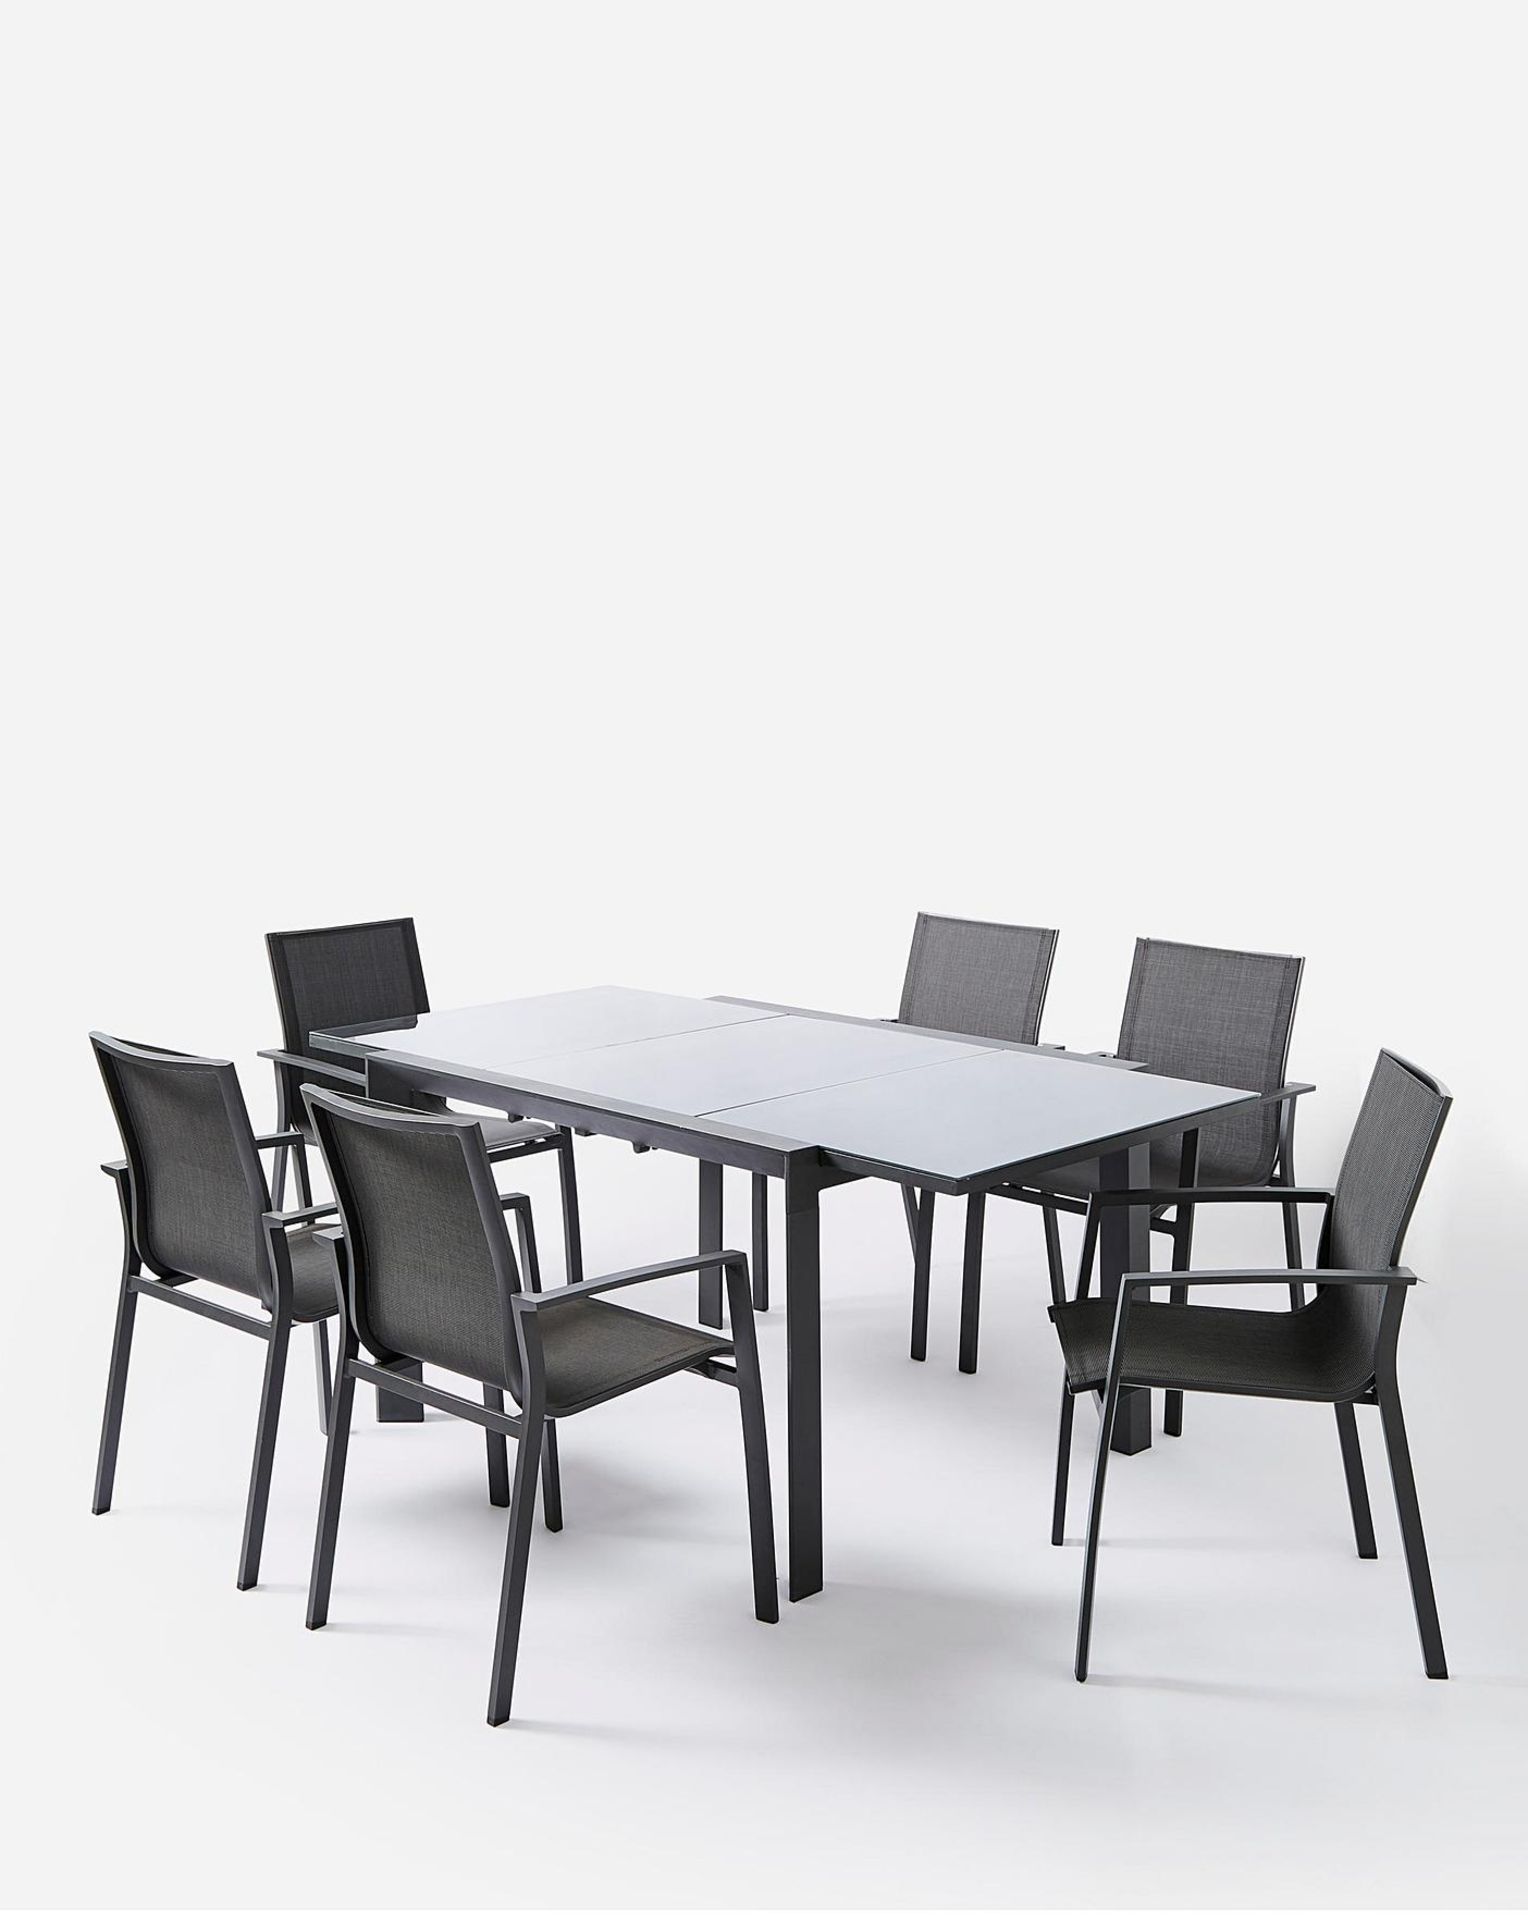 BRAND NEW Oslo 6 Seater Dining Set with Extendable Table. RRP £699 EACH. The Oslo Dining Set with - Image 2 of 4